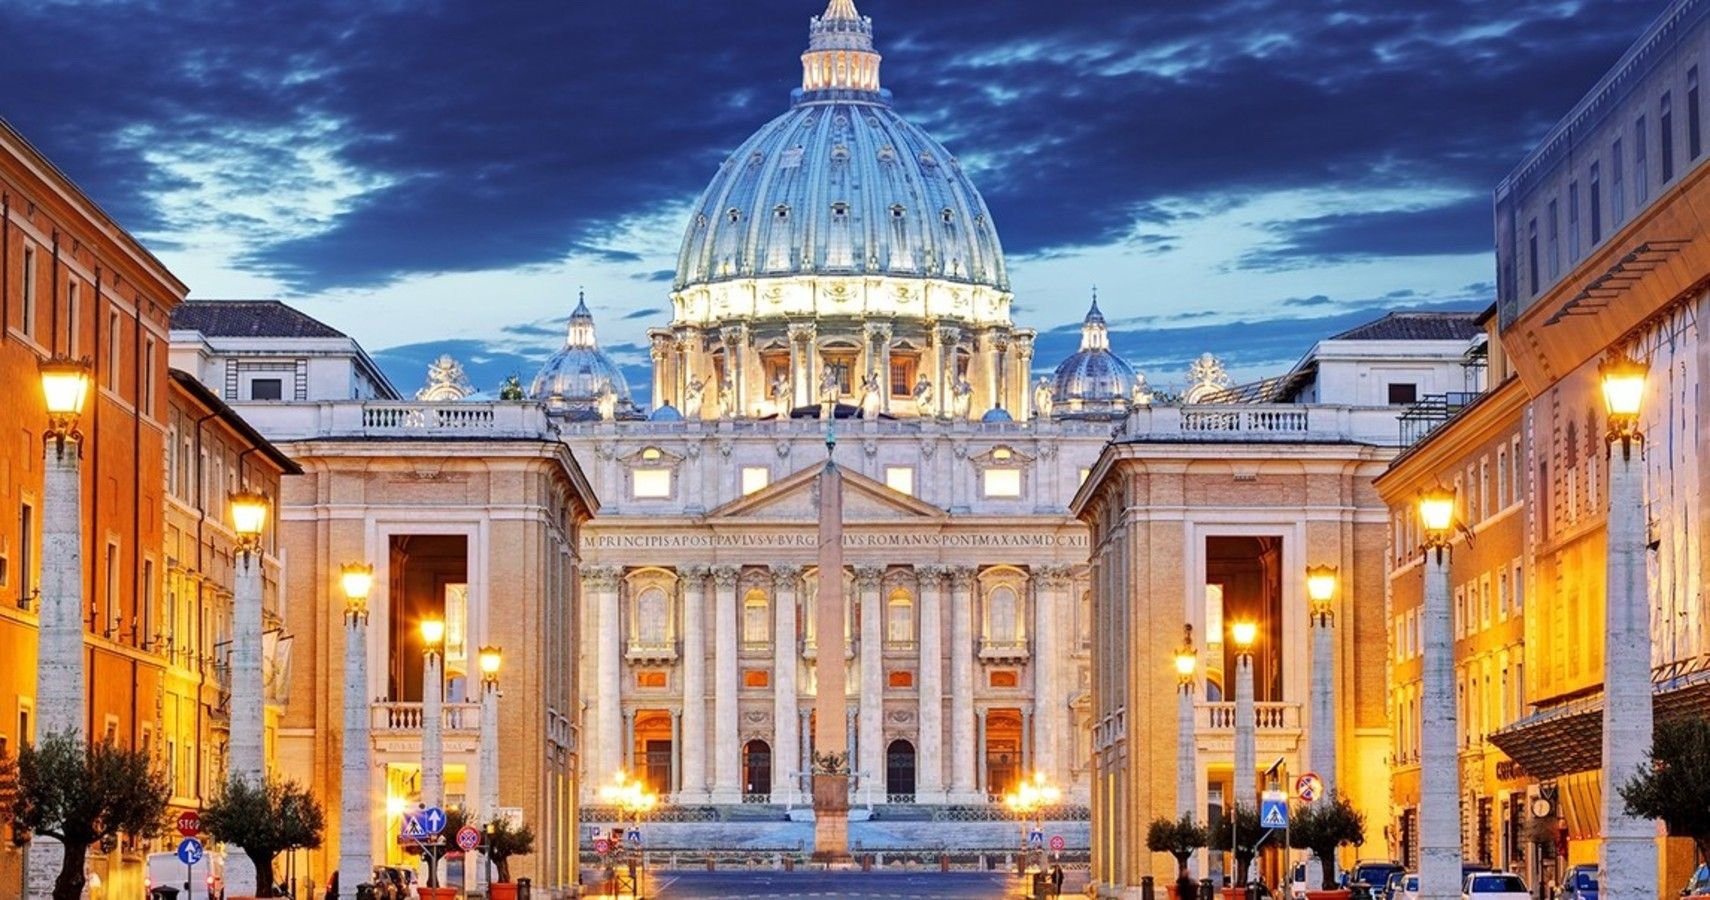 Rome Is The Most Popular International City For American Travelers